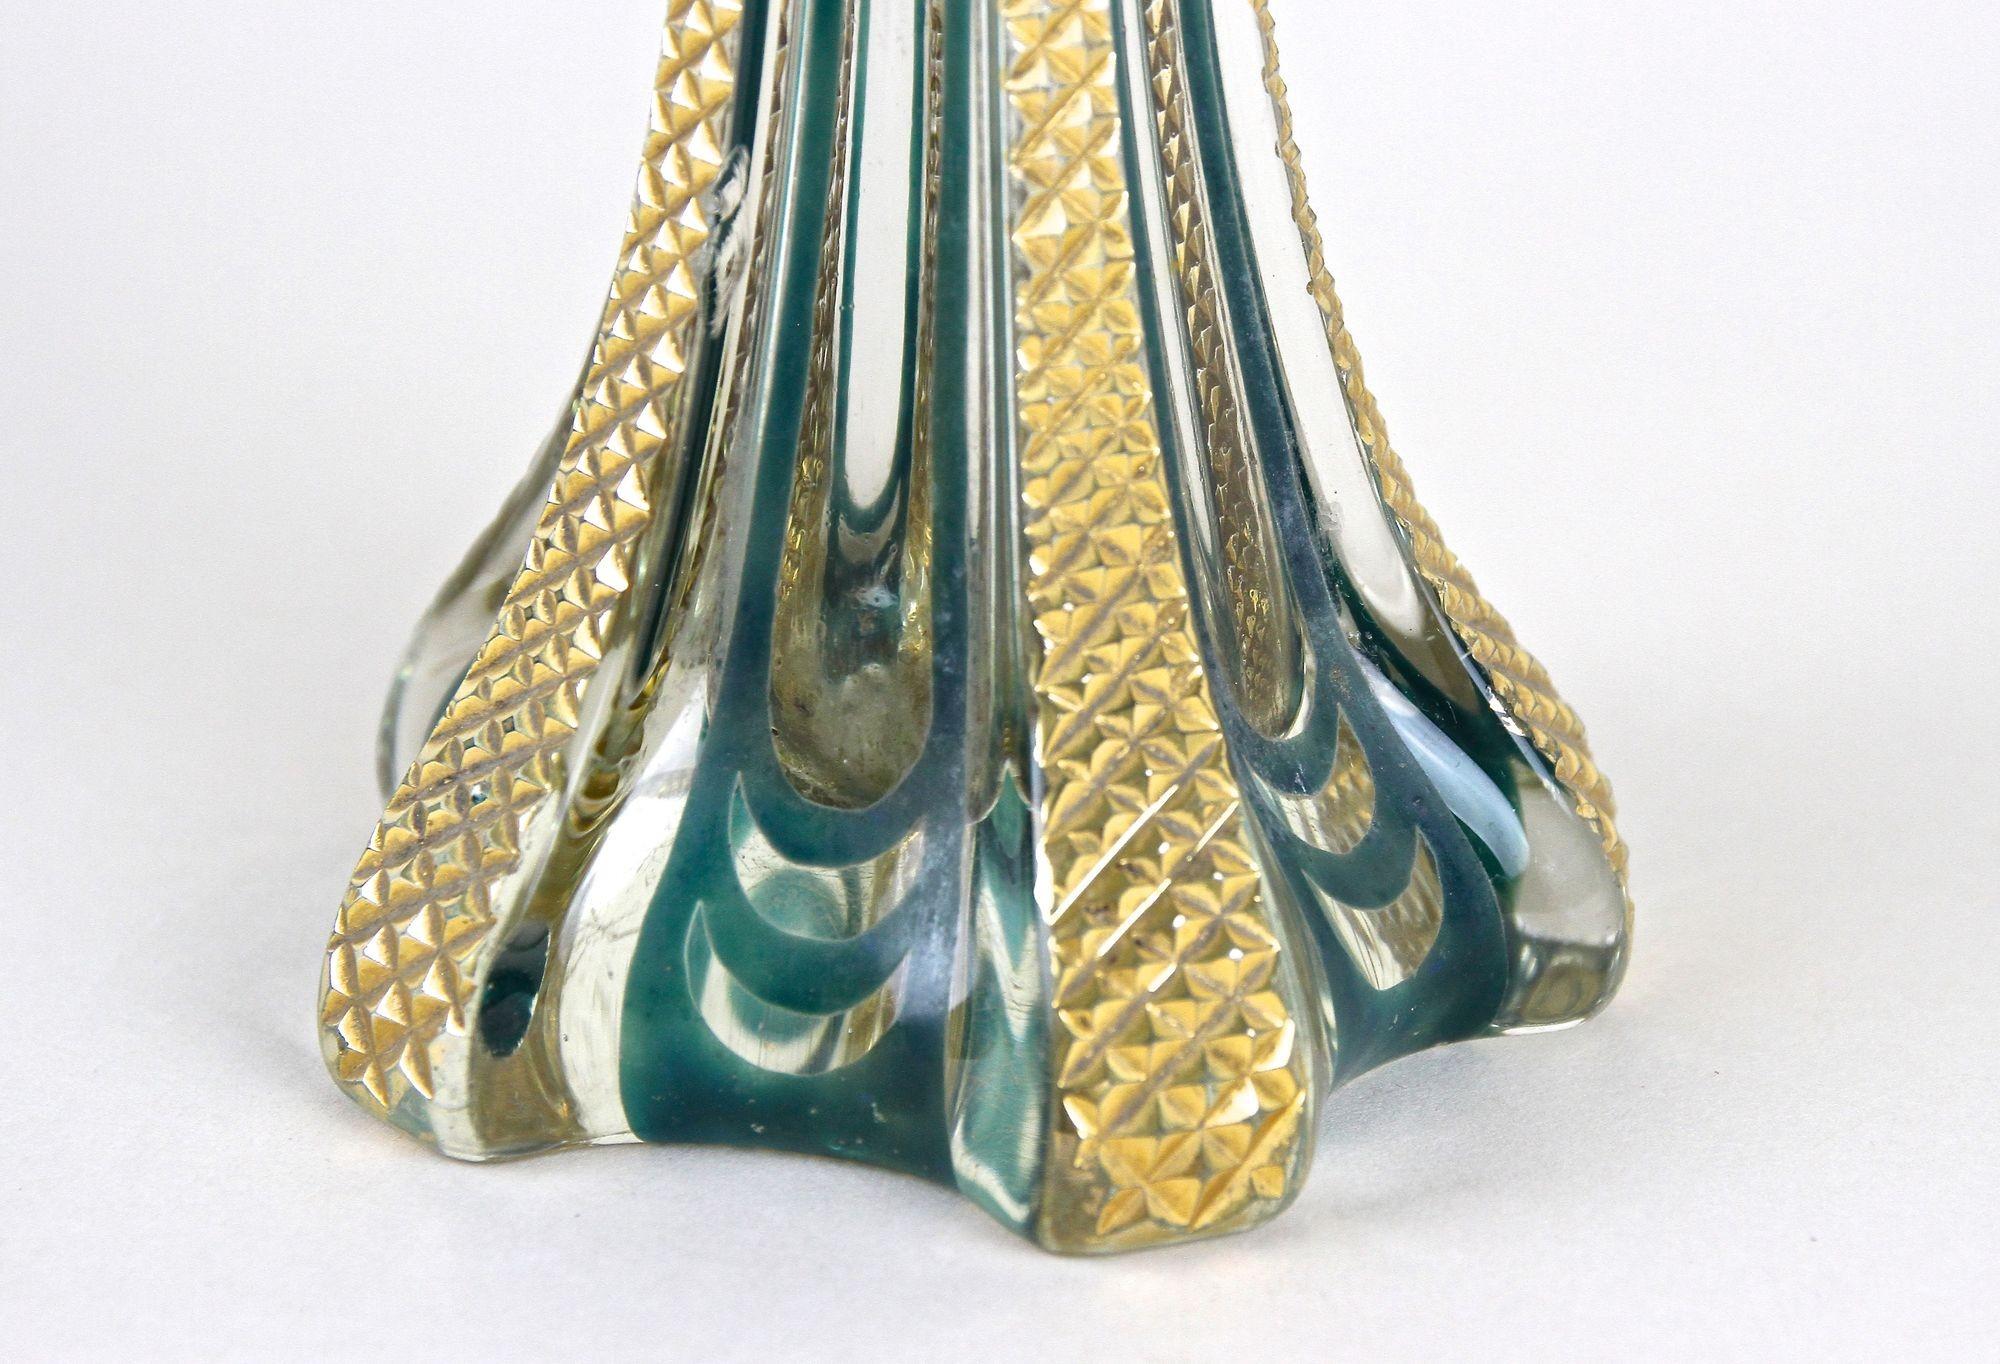 Murano Glass Vase With Gold Accents, Early 20th Century - Italy ca. 1930 For Sale 4